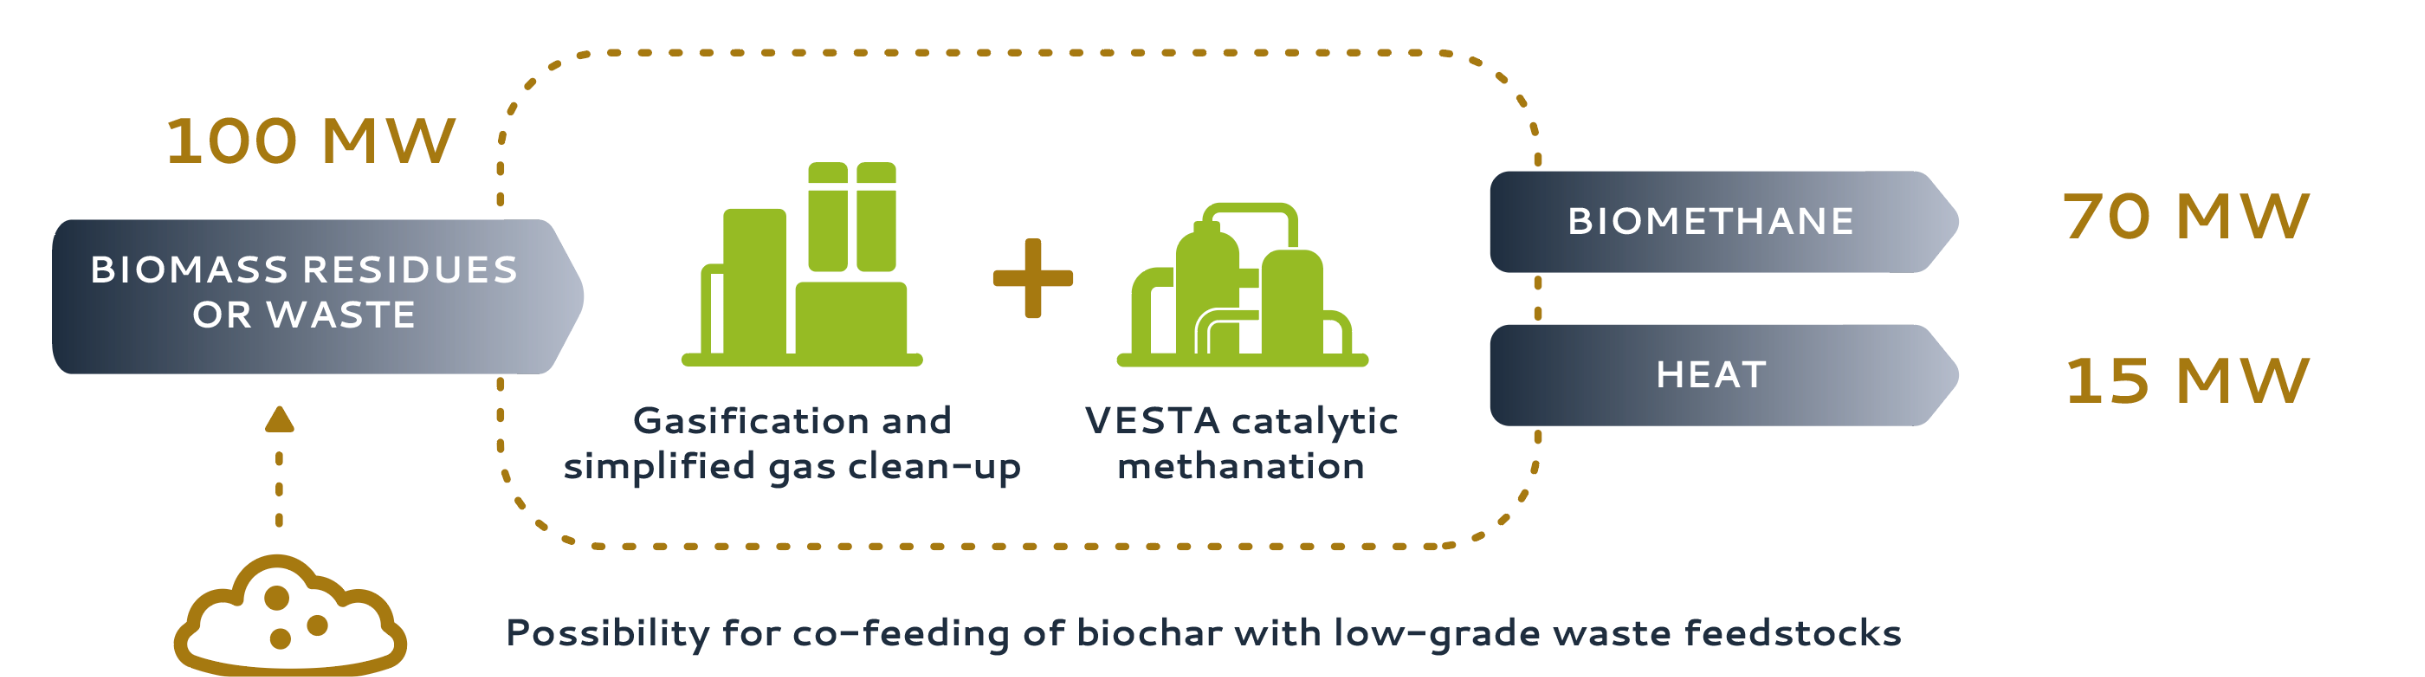 FLEXSNG_THE_CONCEPT_infographic_biomethane